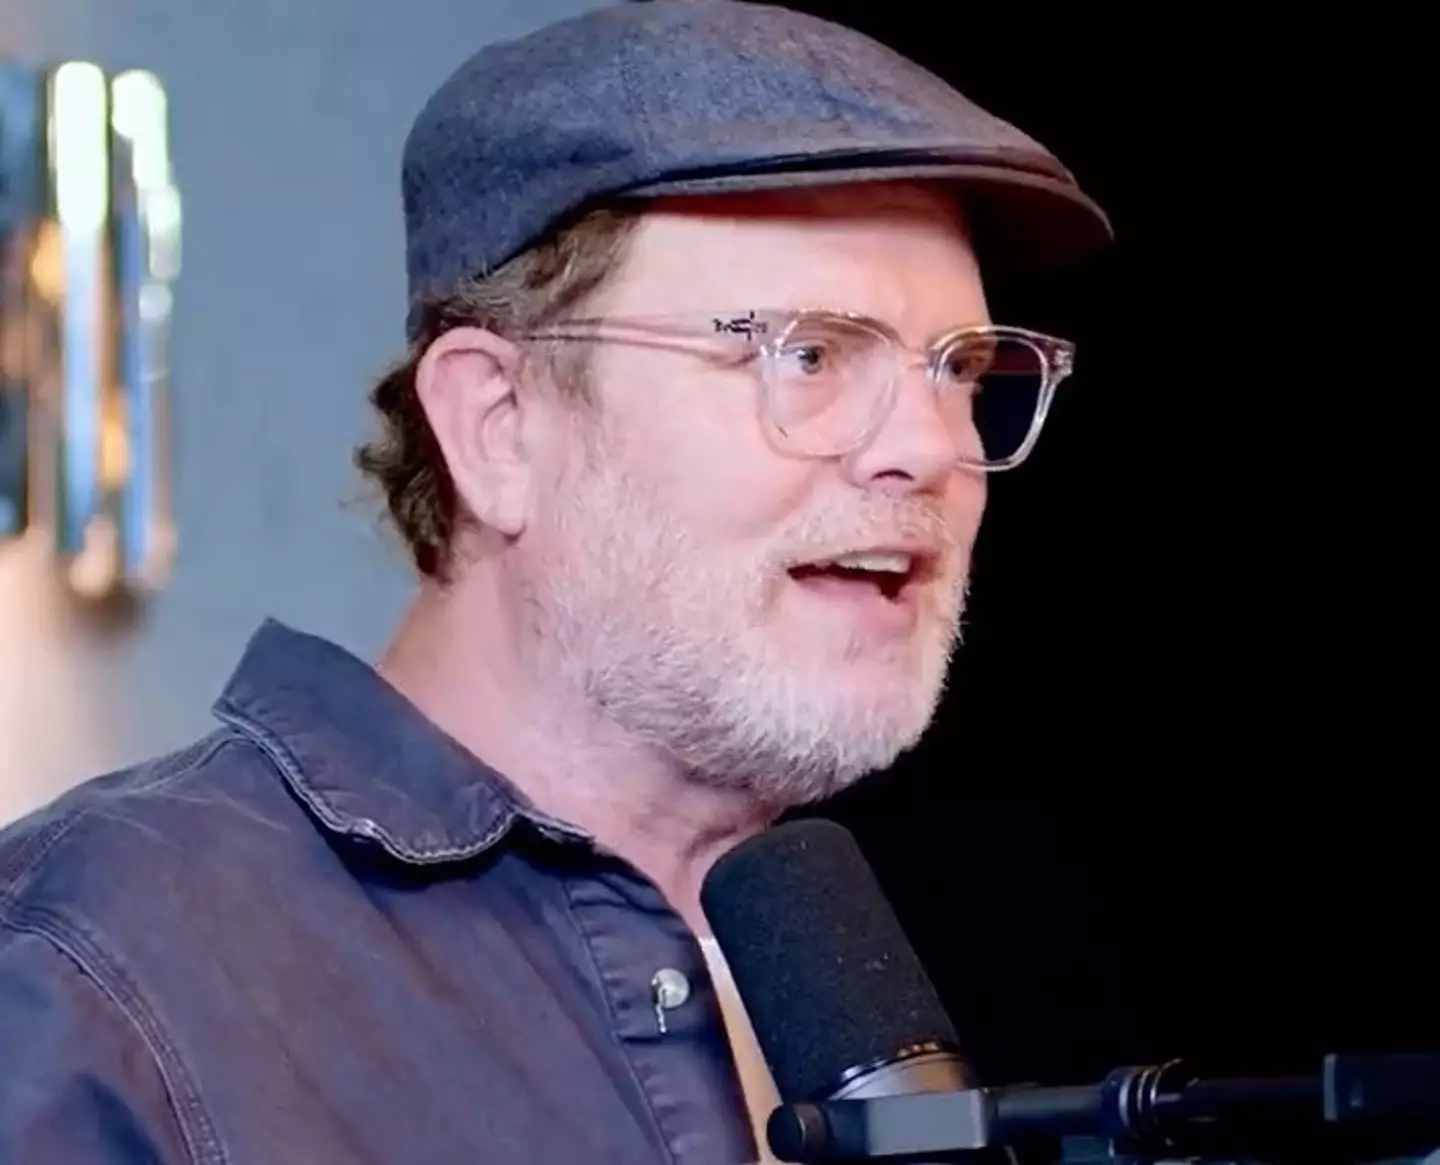 The Office's Rainn Wilson has opened up on what it was like living as an ‘abandoned toddler’.